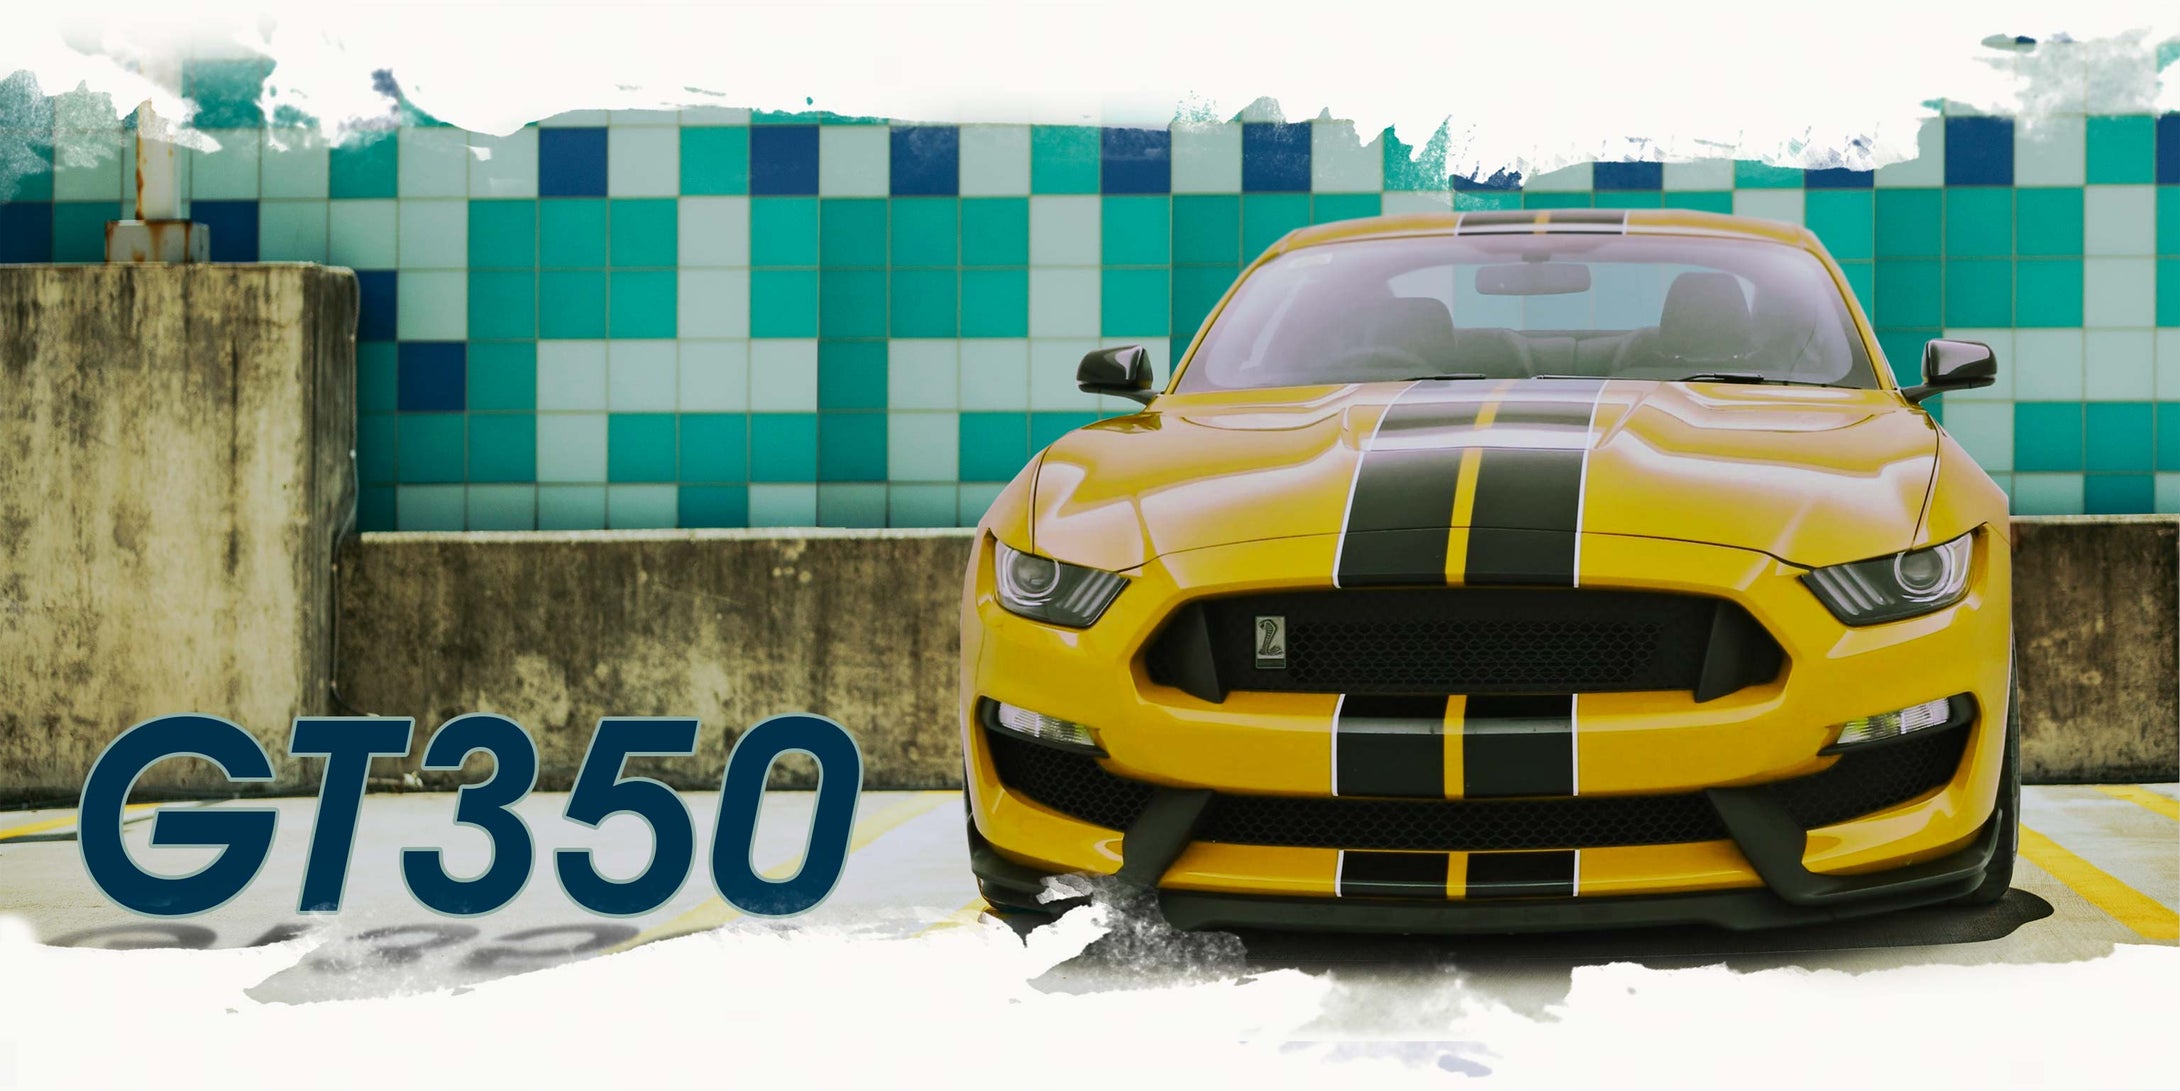 a yellow Shelby GT350 Mustang with glossy black racing stripes with white pinstriping